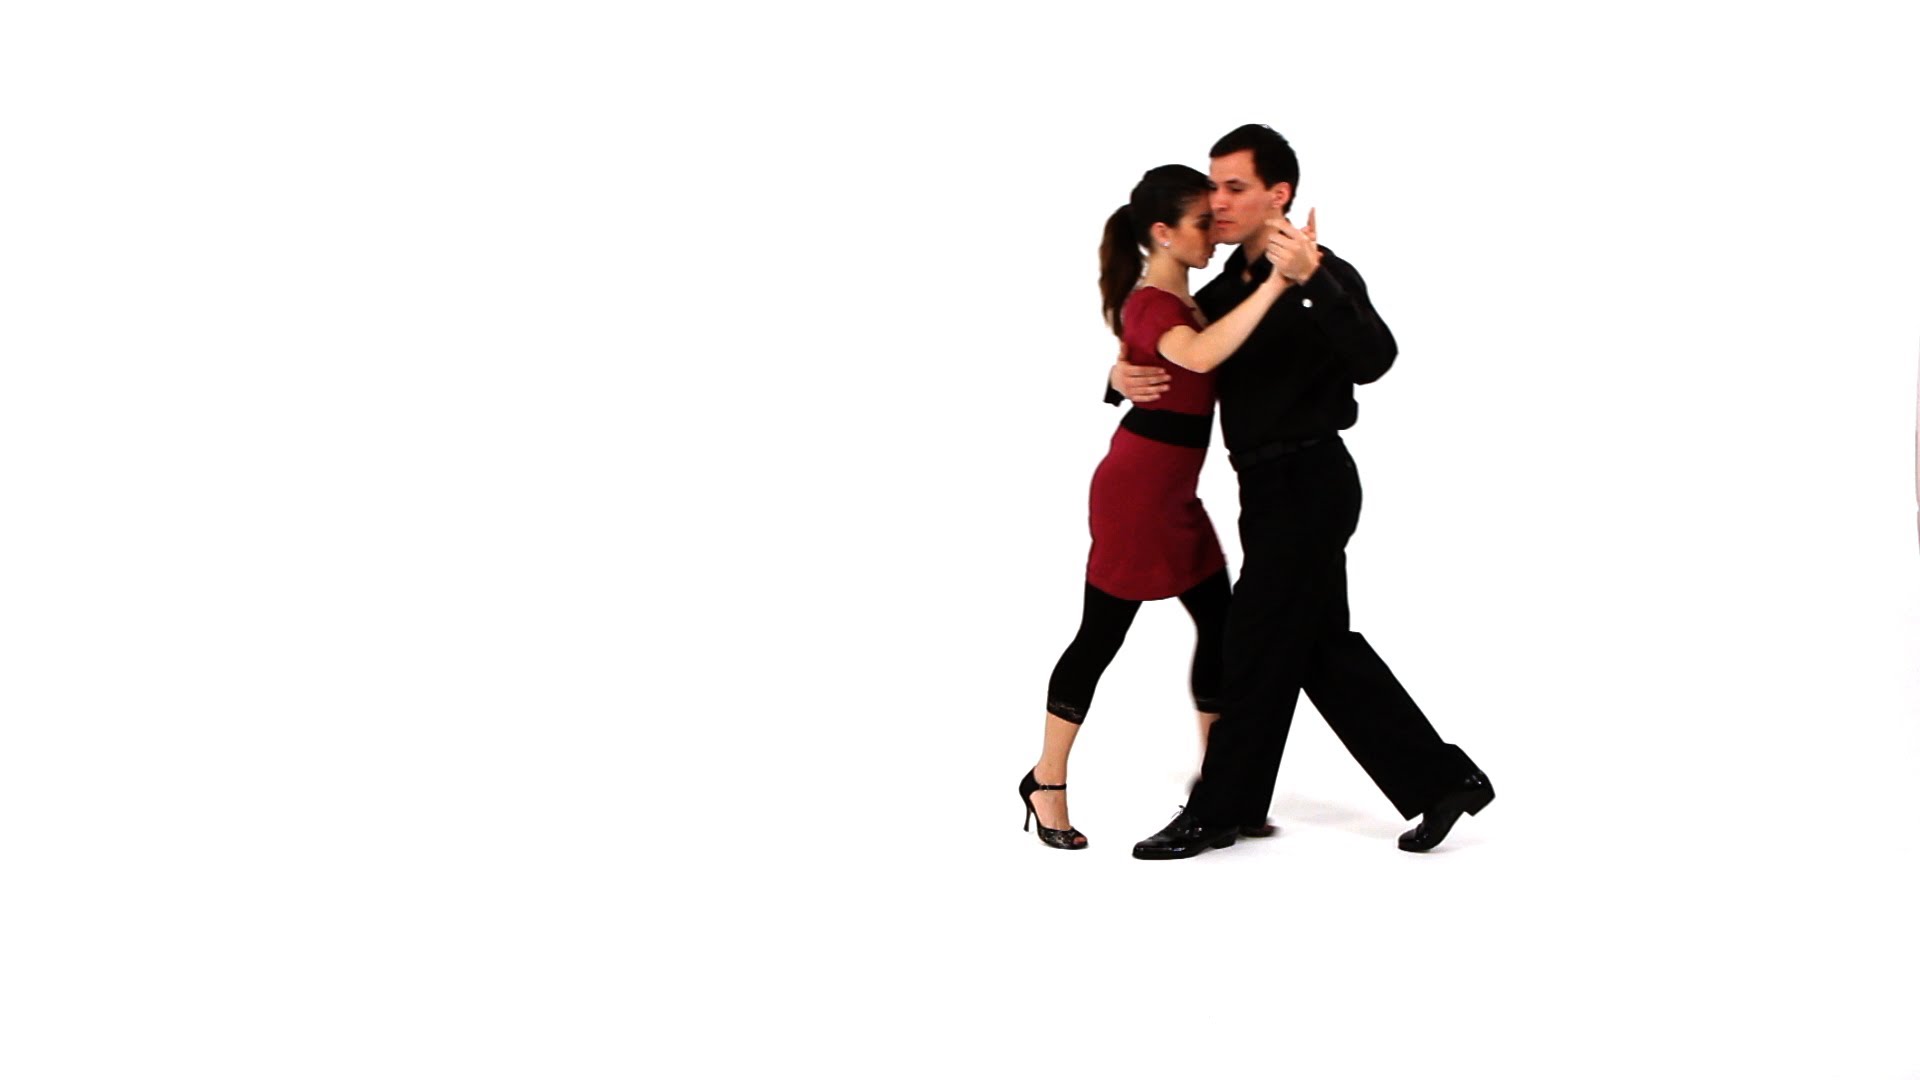 How to Dance the Tango with Music | Argentine Tango - YouTube